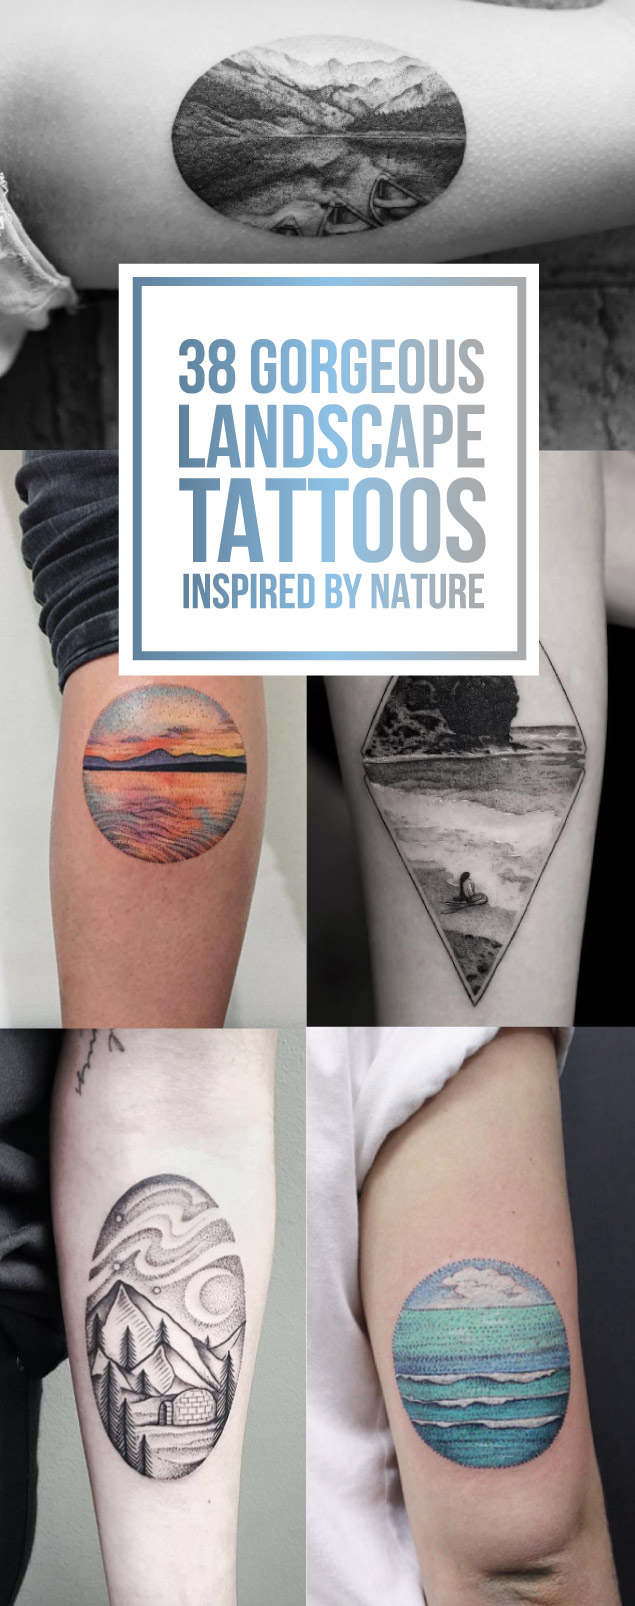 38 Gorgeous Landscape Tattoo Designs Inspired by Nature